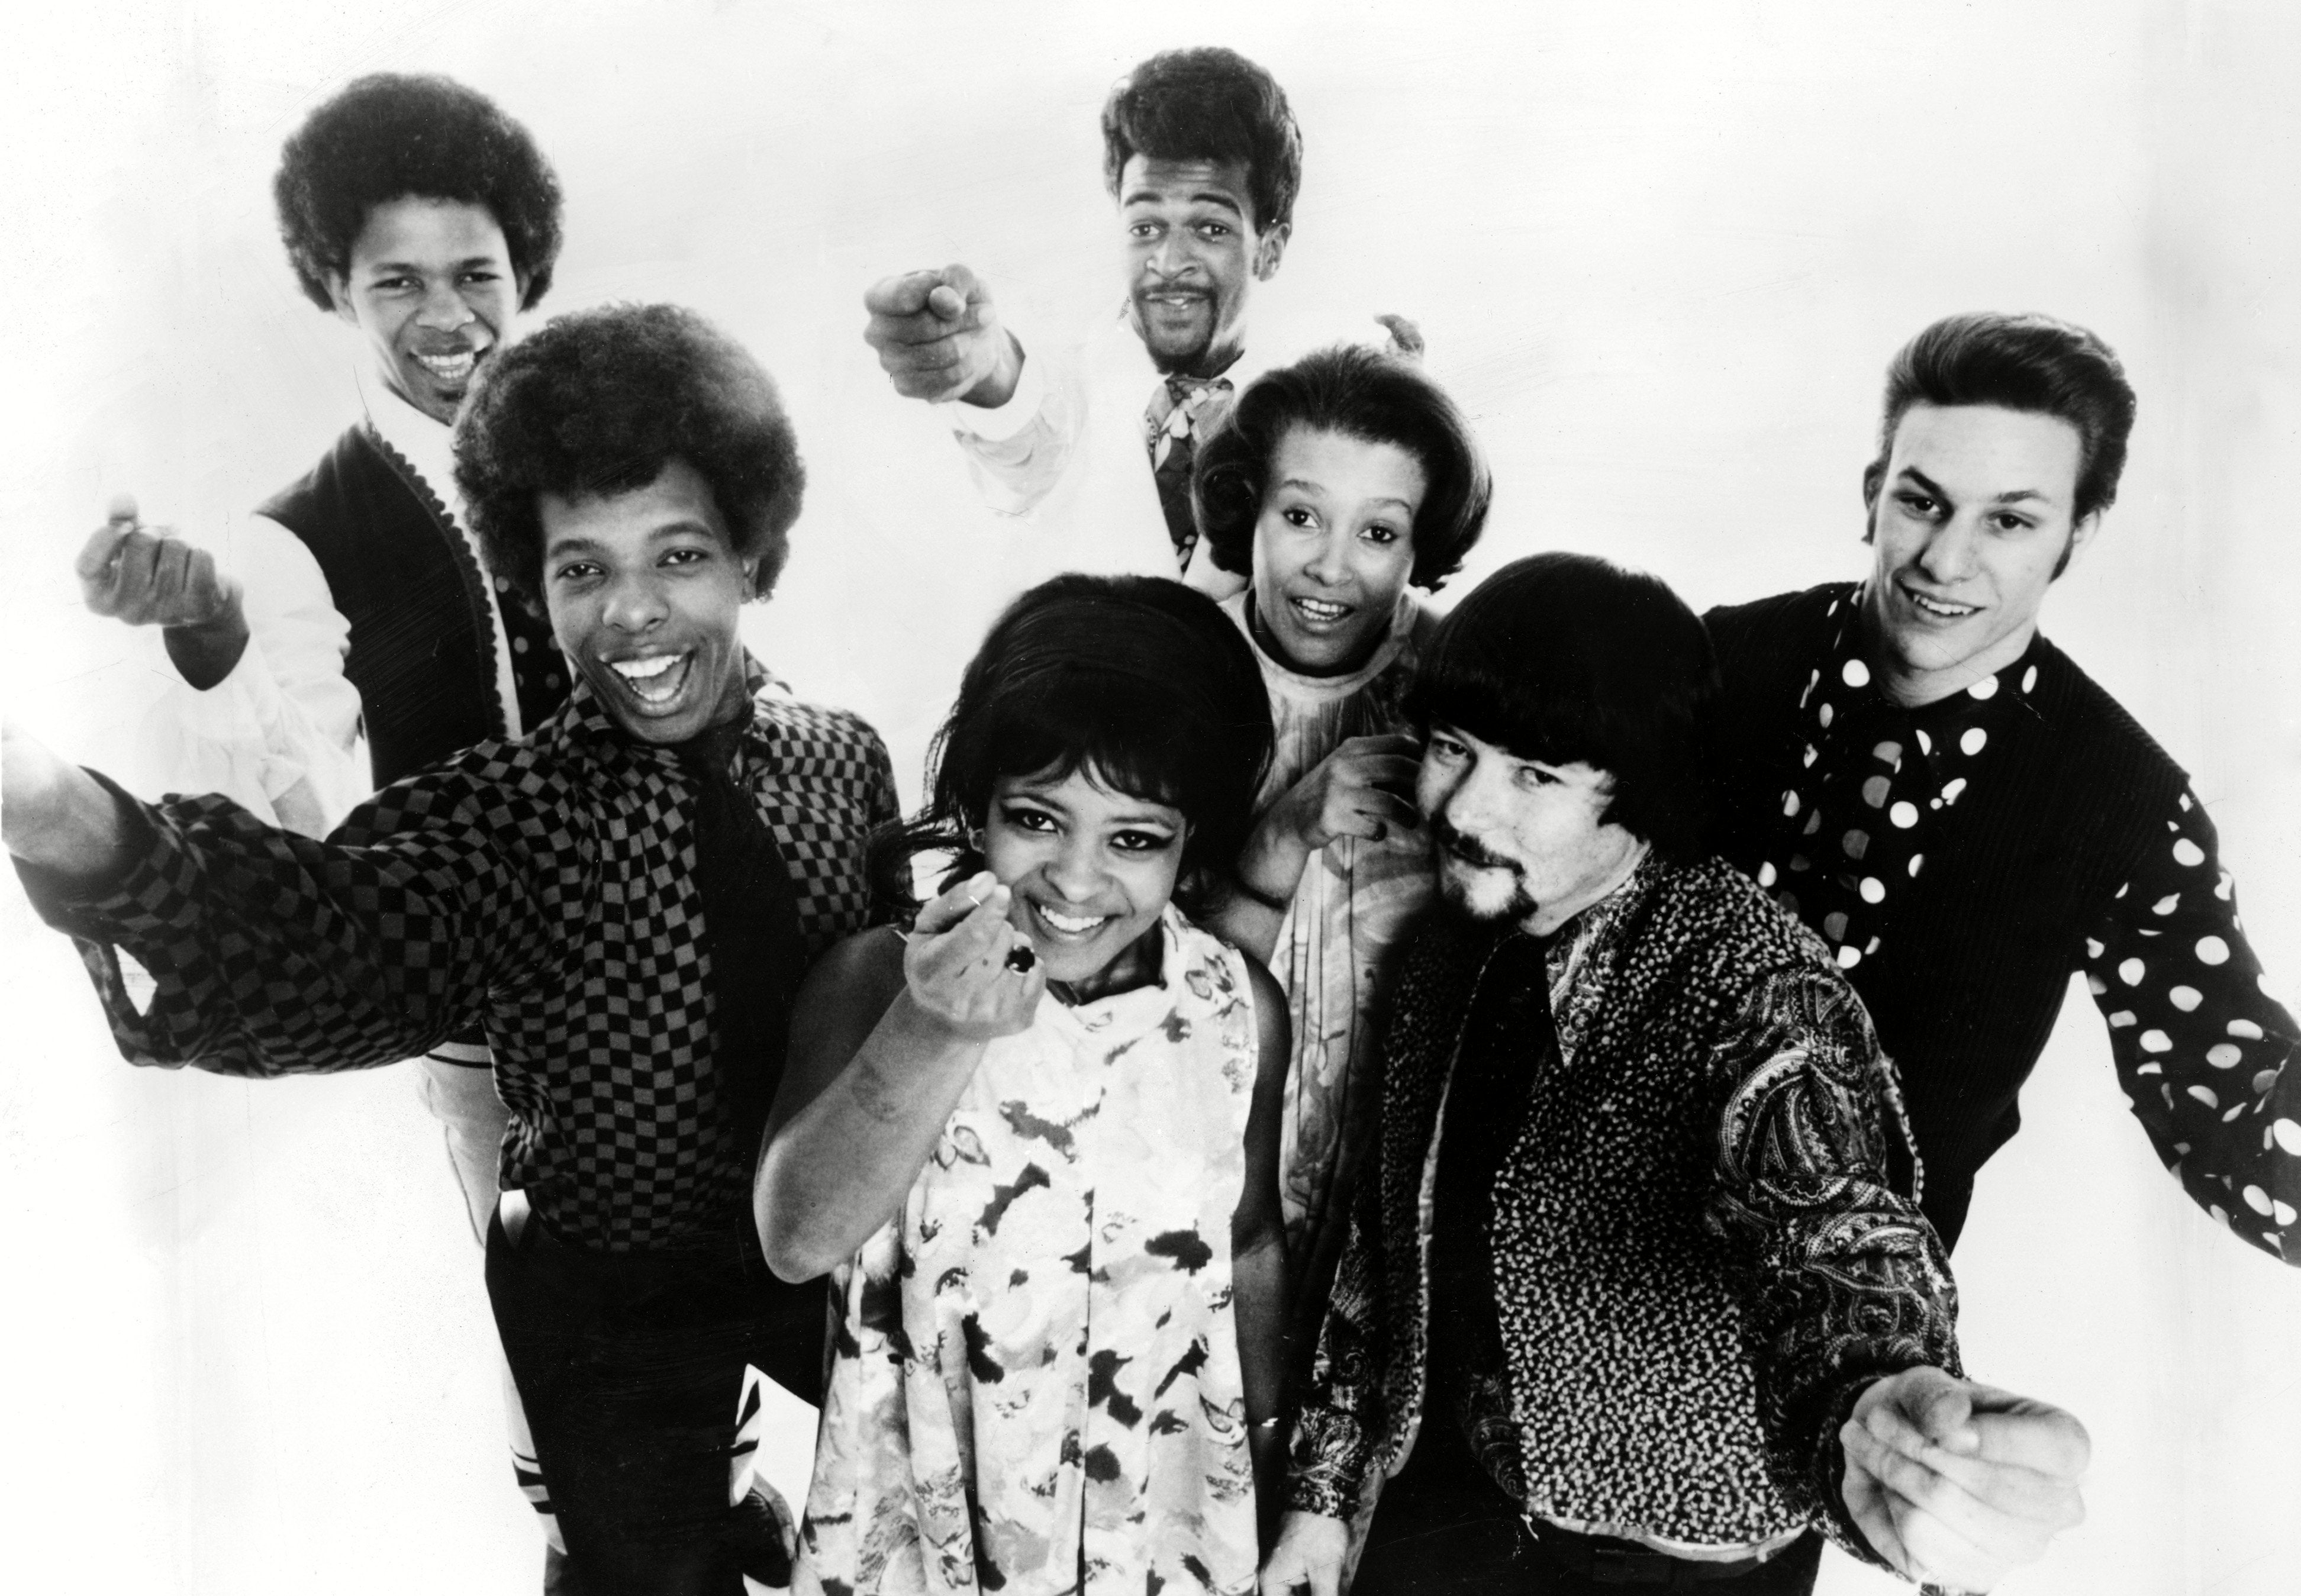 The band, here in 1968, were pivotal in the development of funk and soul